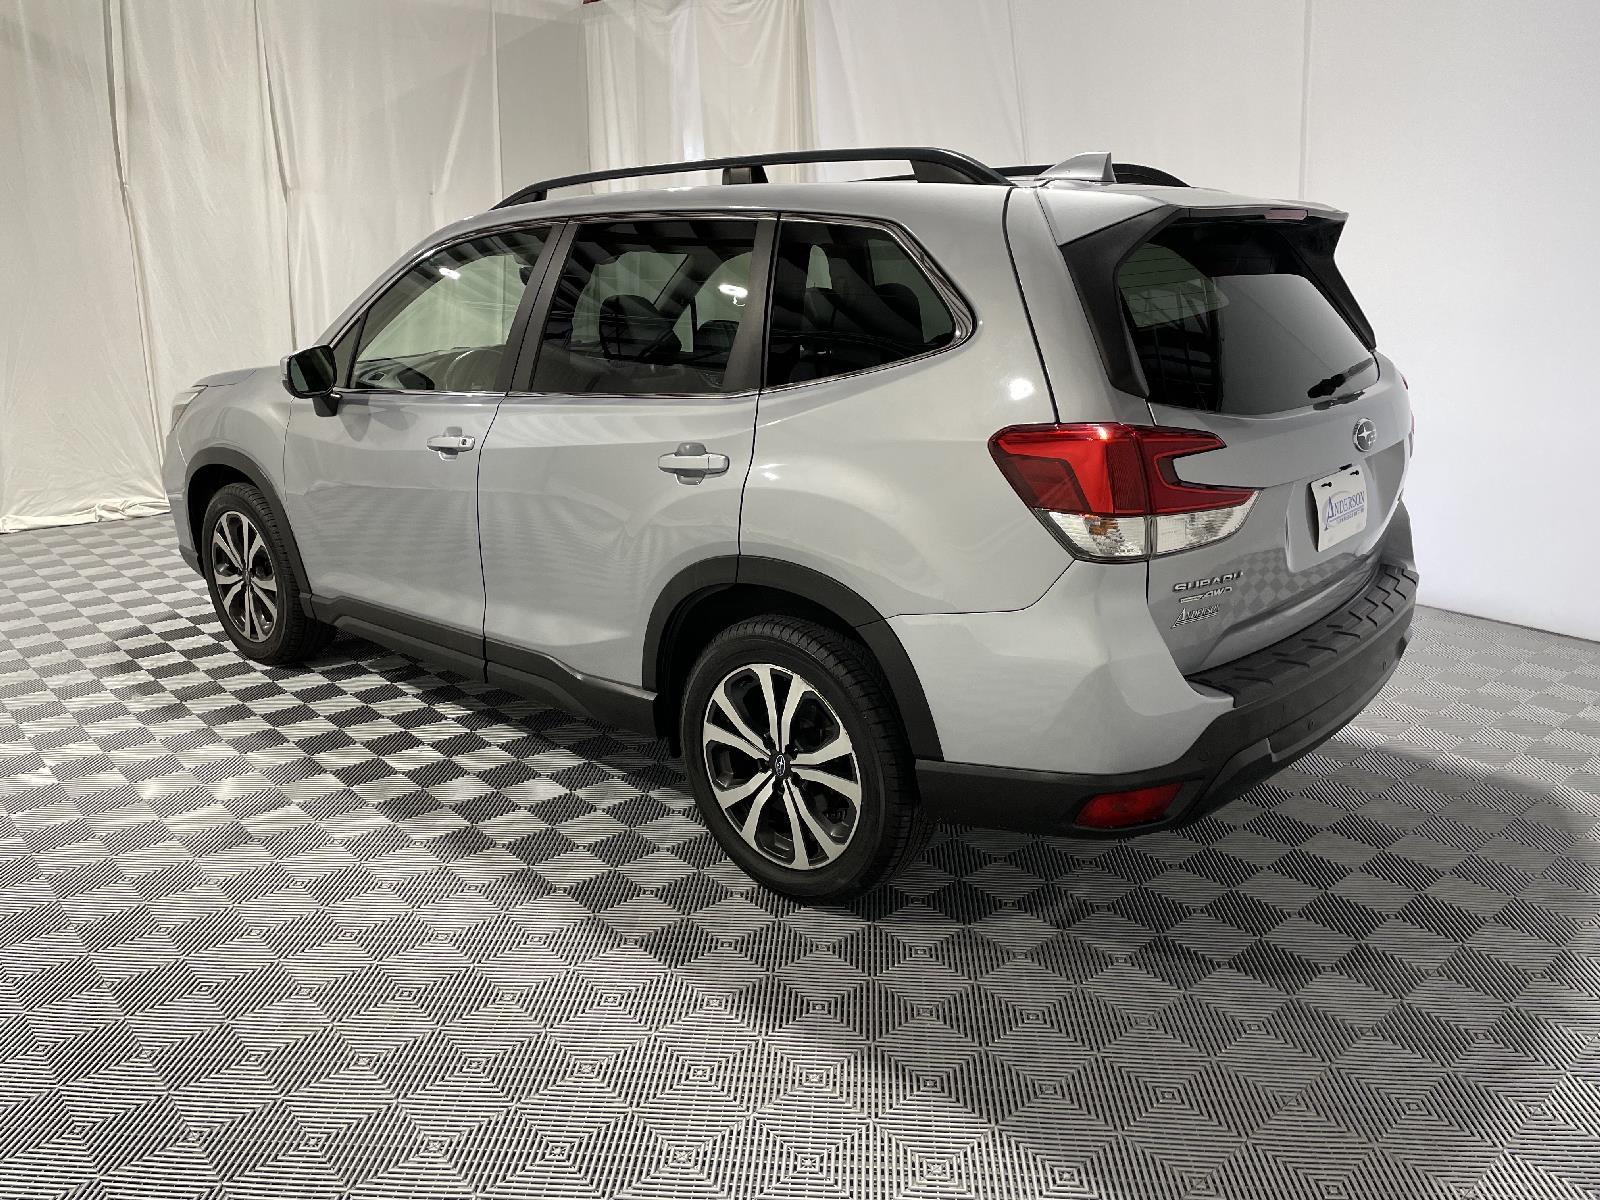 Used 2019 Subaru Forester Limited SUV for sale in St Joseph MO